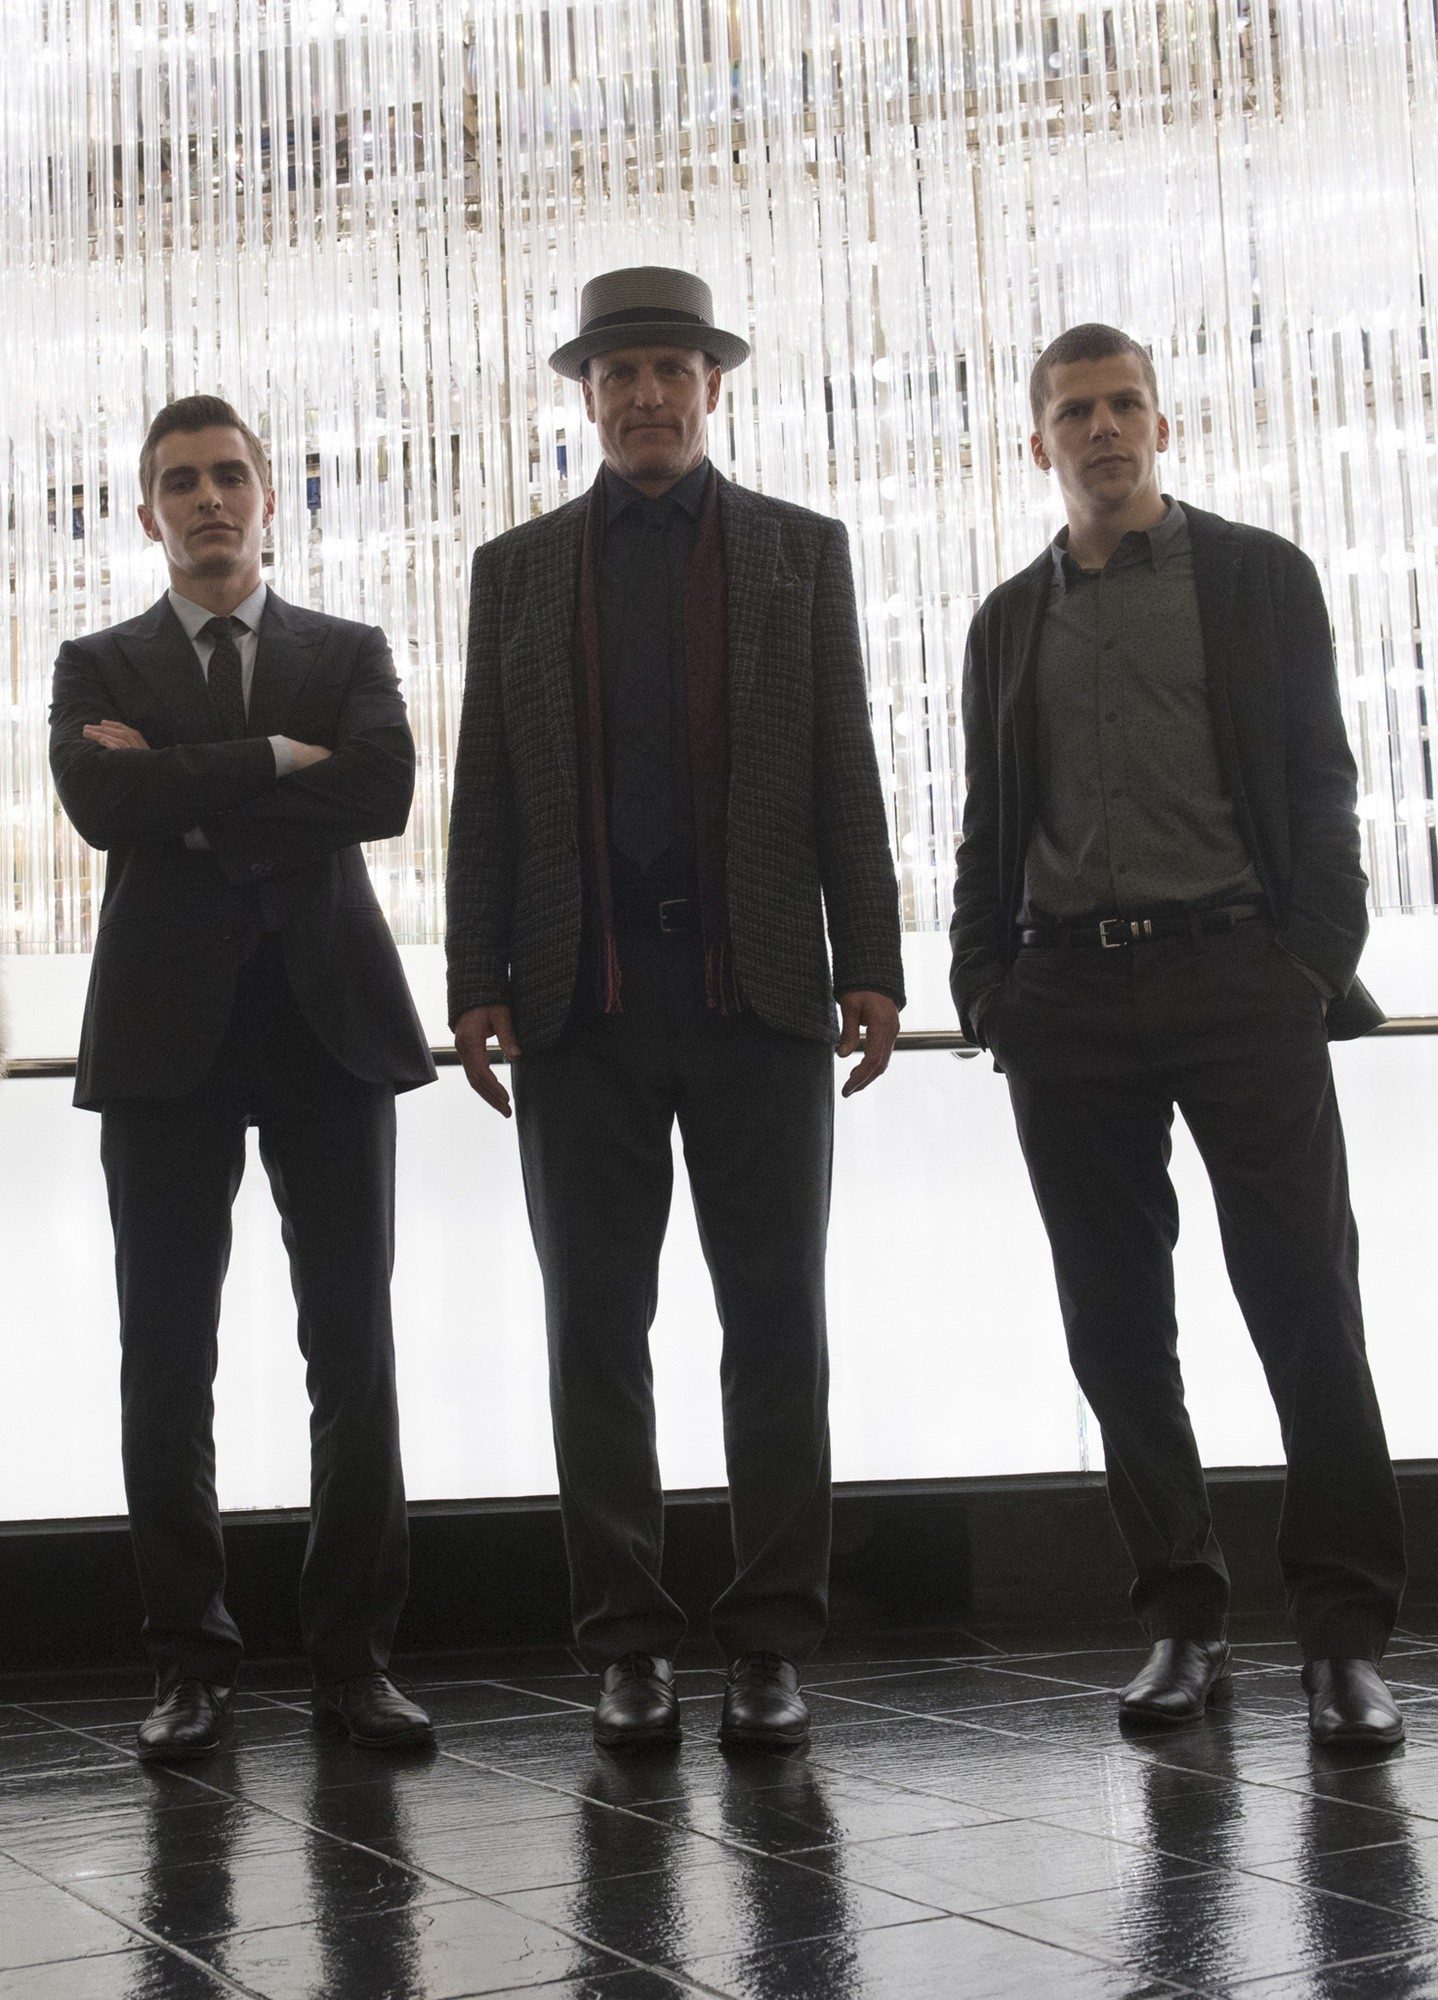 Dave Franco, Mark Ruffalo and Jesse Eisenberg in Lionsgate Films' Now You See Me 2 (2016)